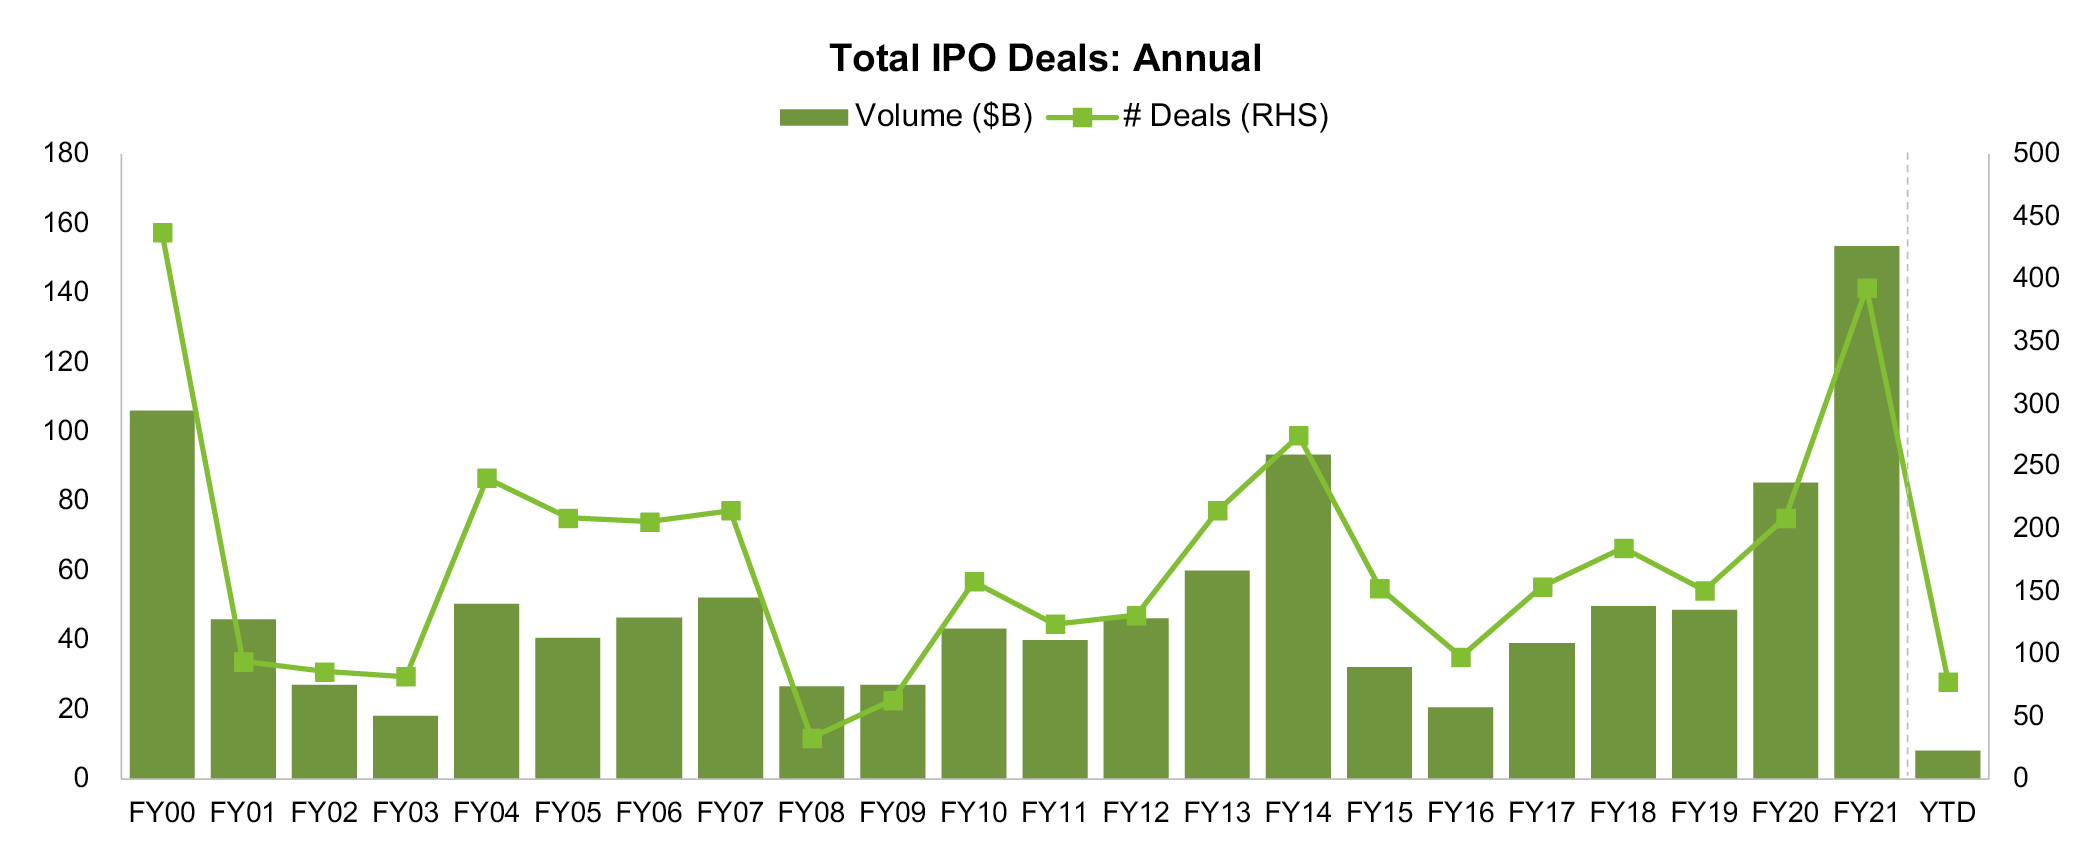 Total IPO Deals: Annual